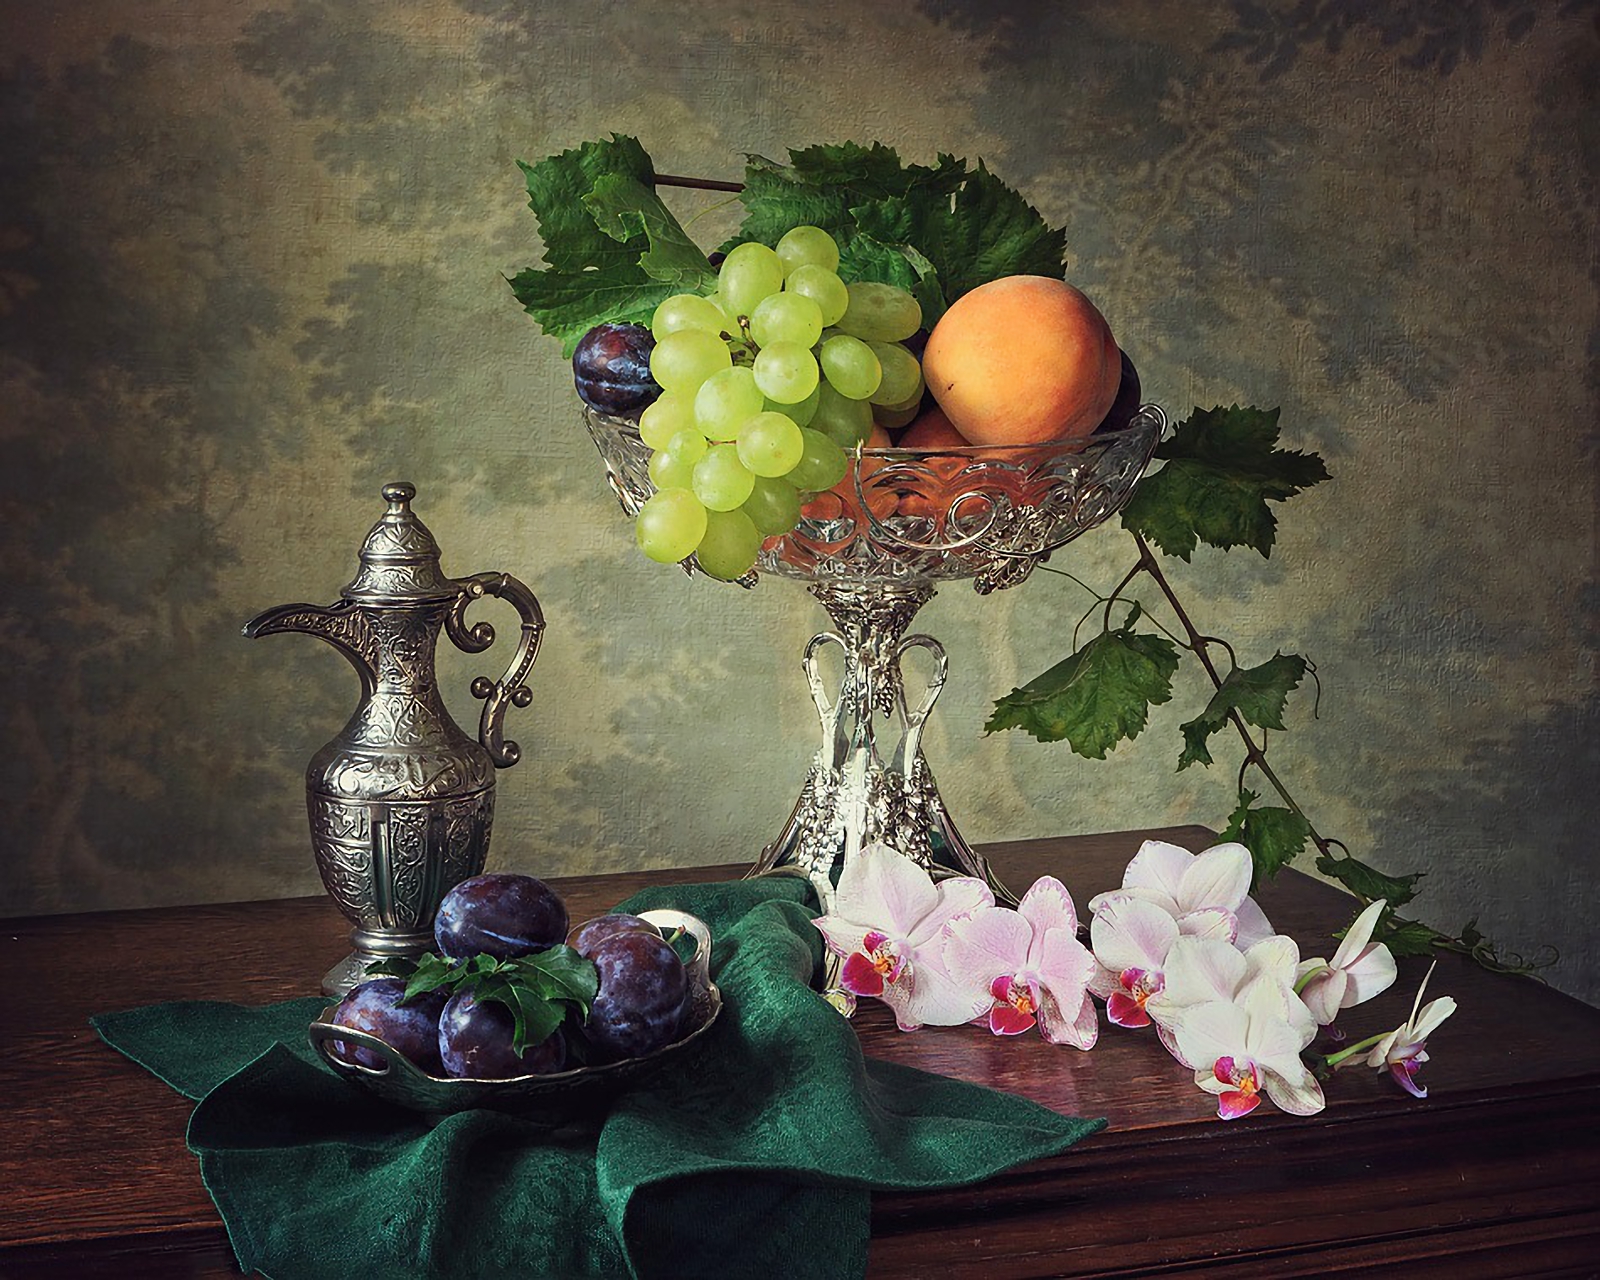 photography, still life, fruit, grapes, orchid, pitcher, plum